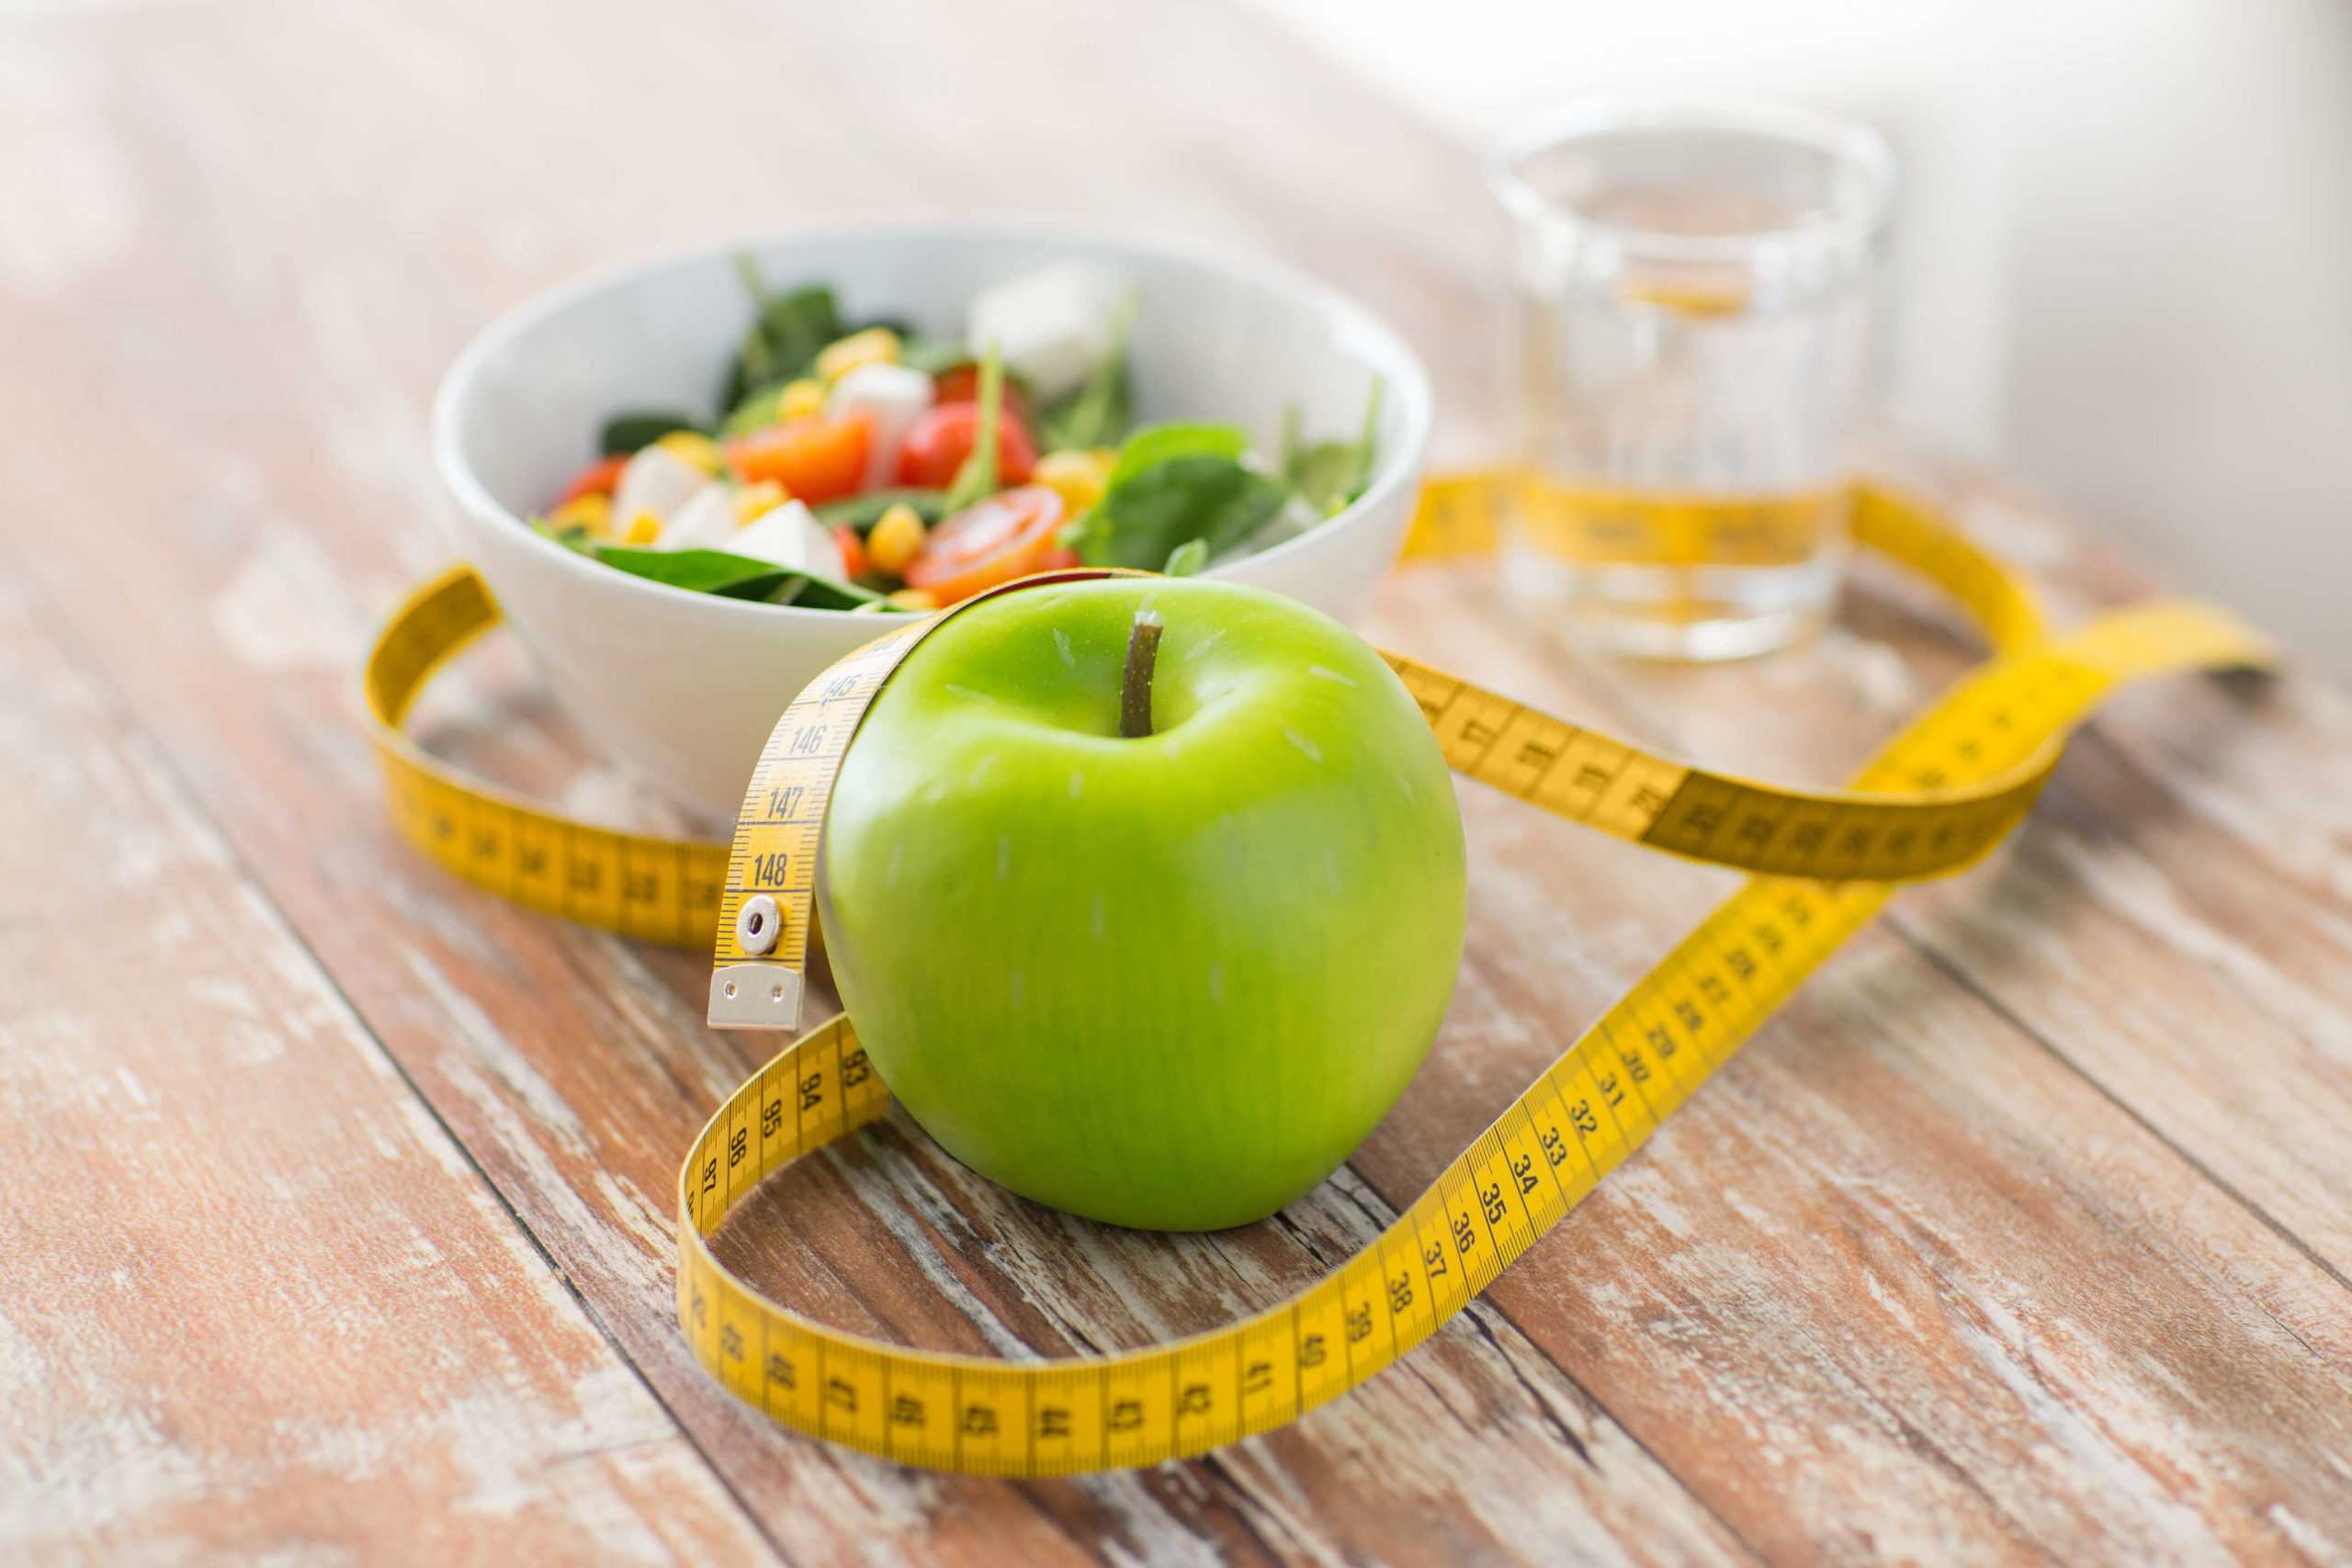 A Registered Dietitian’s Take on Fad Diets